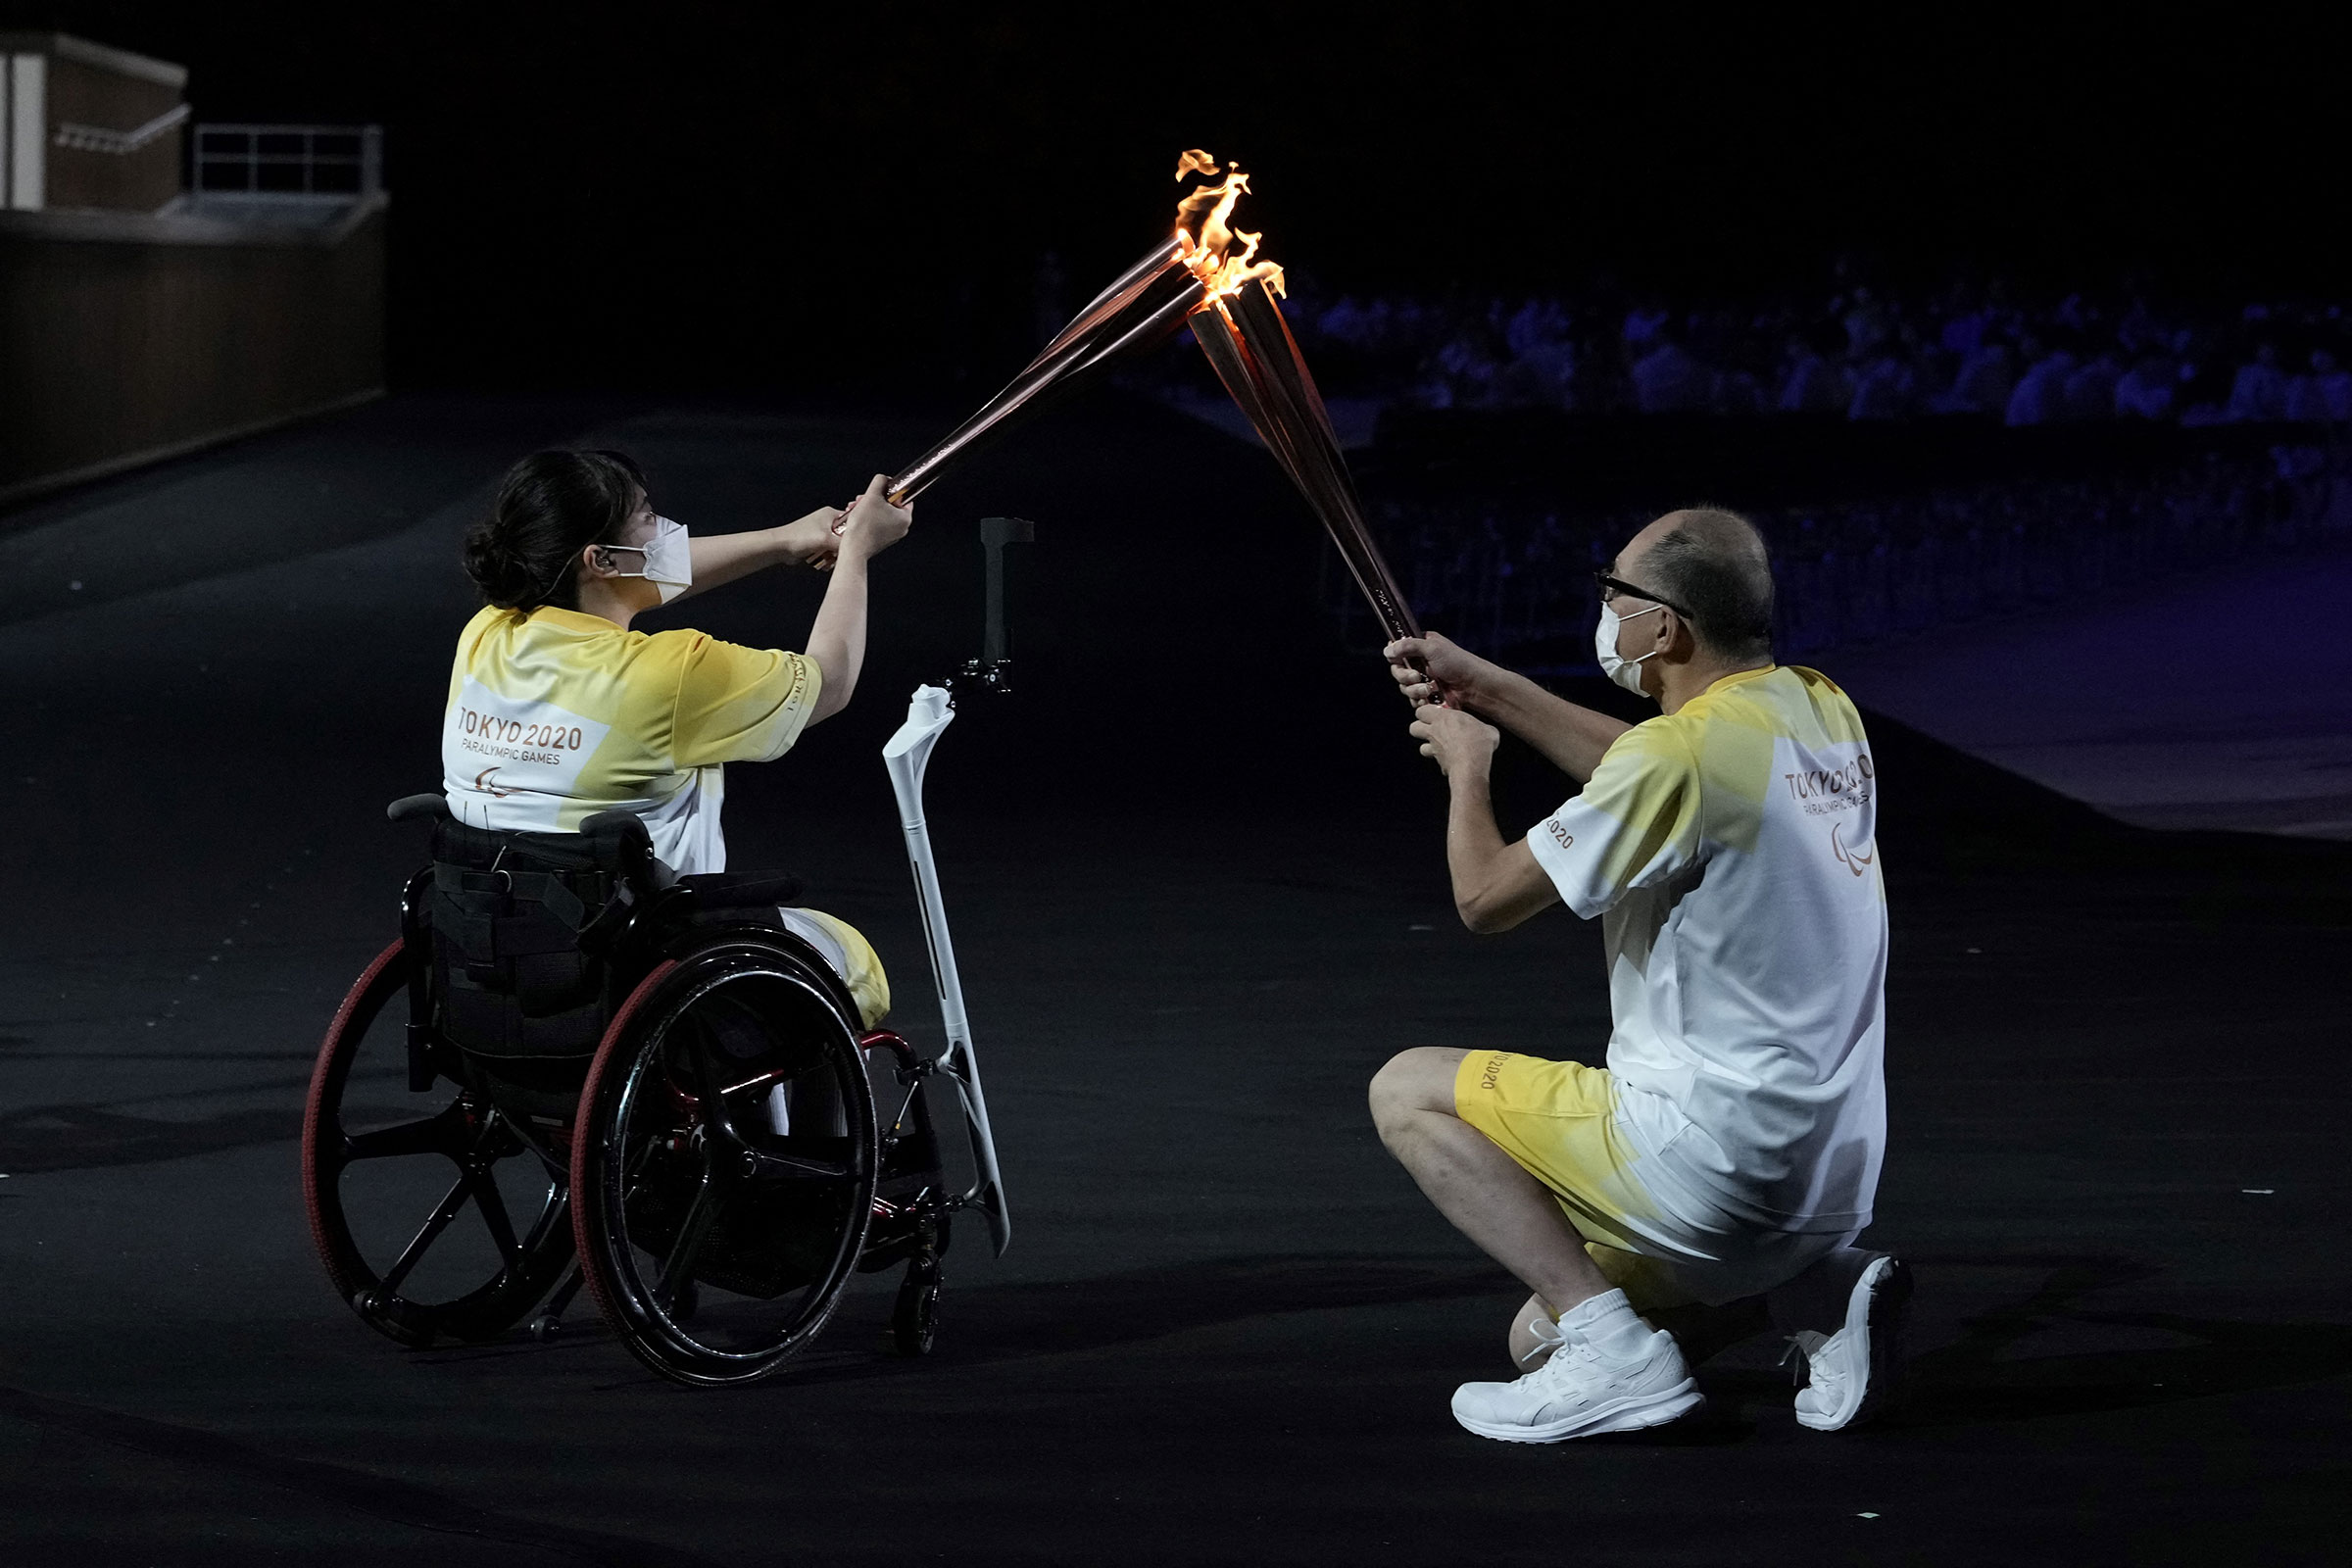 The Paralympic flame is passed between torchbearers during the opening ceremony for the Tokyo 2020 Paralympic Games at the Olympic Stadium in Tokyo on August 24, 2021. (Yasuyoshi Chiba—AFP/Getty Images)